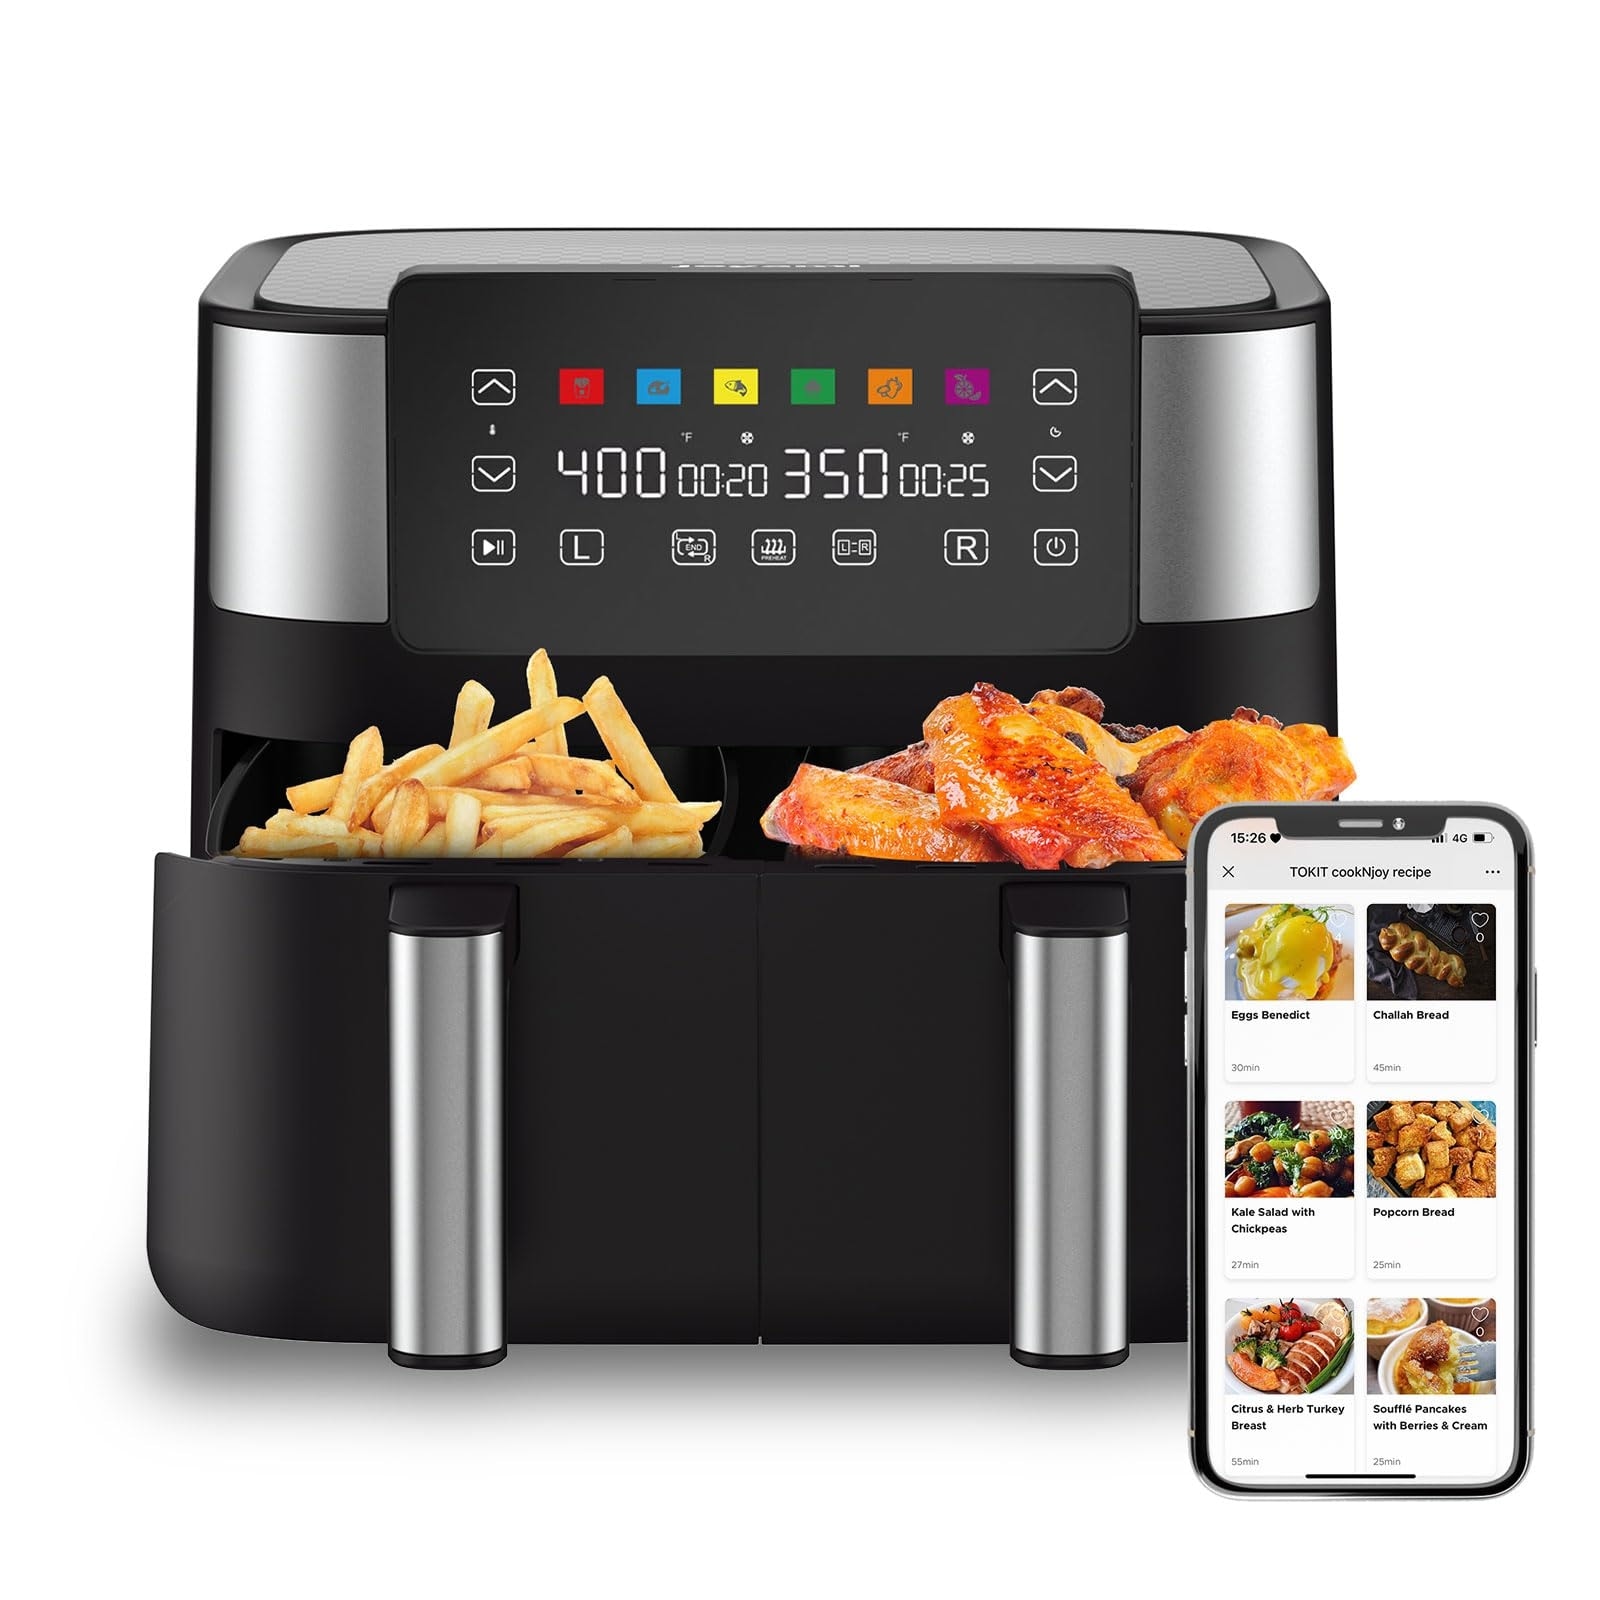 https://ak1.ostkcdn.com/images/products/is/images/direct/a00a50fb1824dfe4157d7111e57417d26f590a91/8-Qt-Air-Fryer-with-2-Baskets%2C-Dual-Basket-AirFryer-with-Sync-Finish-Function%2C-Airfryer-for-Bake%2C-Dehydrate%2C-Roast%2C-Broil-%26-More.jpg